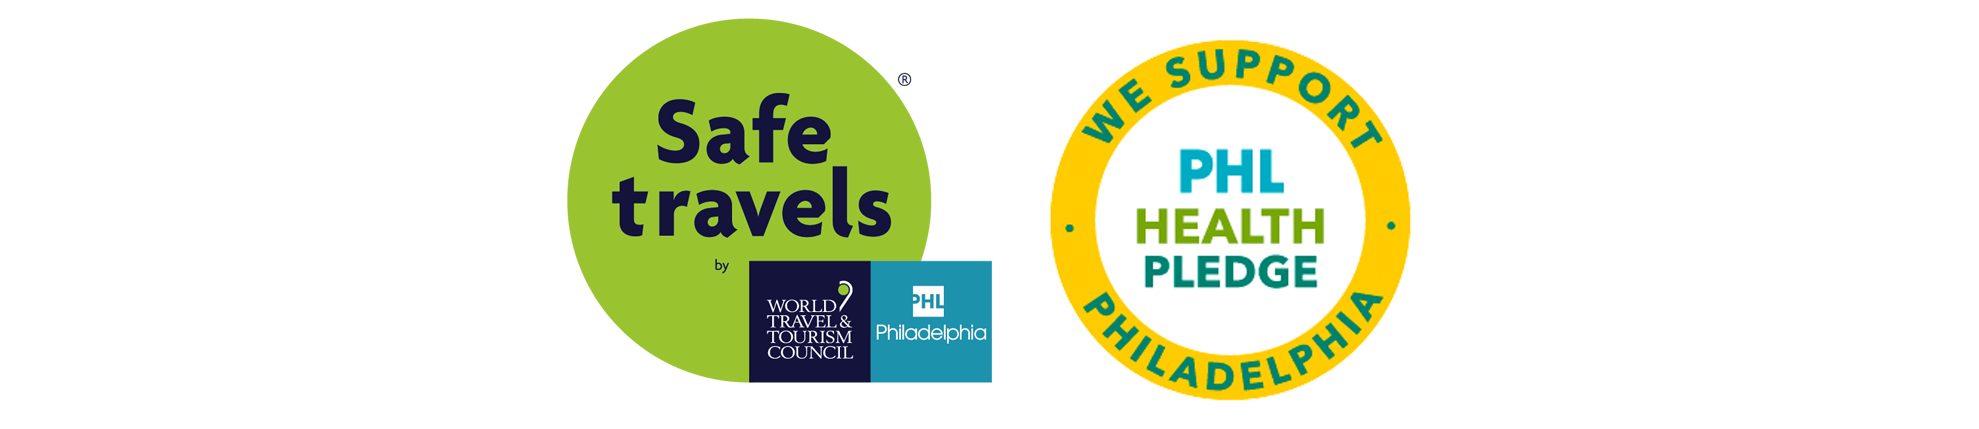 2021 Safety Badges WTTC Unstoppable PHL